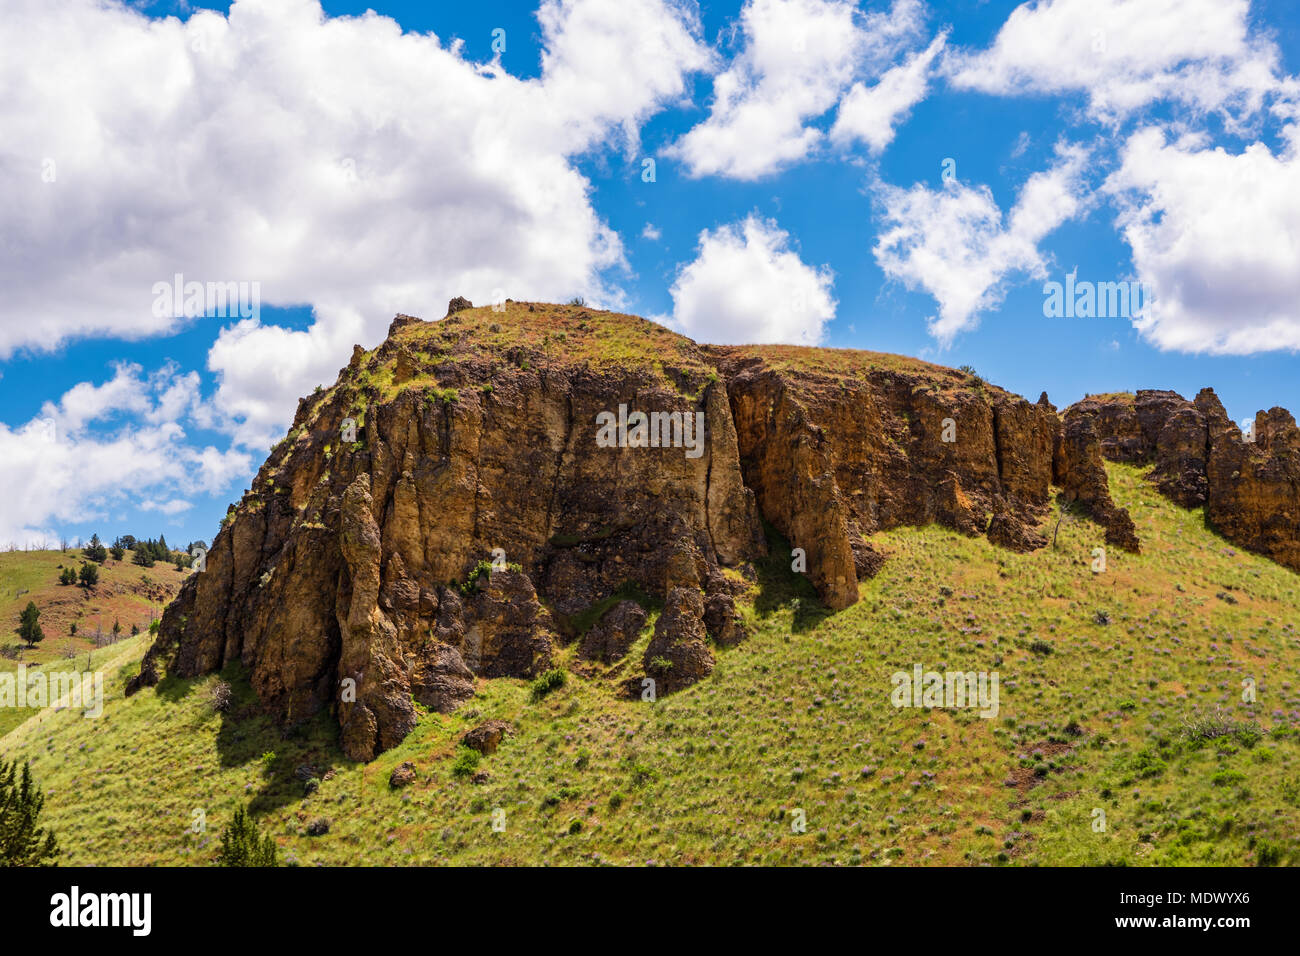 https://c8.alamy.com/comp/MDWYX6/sharp-rock-cliffs-on-a-bed-of-soft-grass-blue-sky-and-clouds-above-MDWYX6.jpg